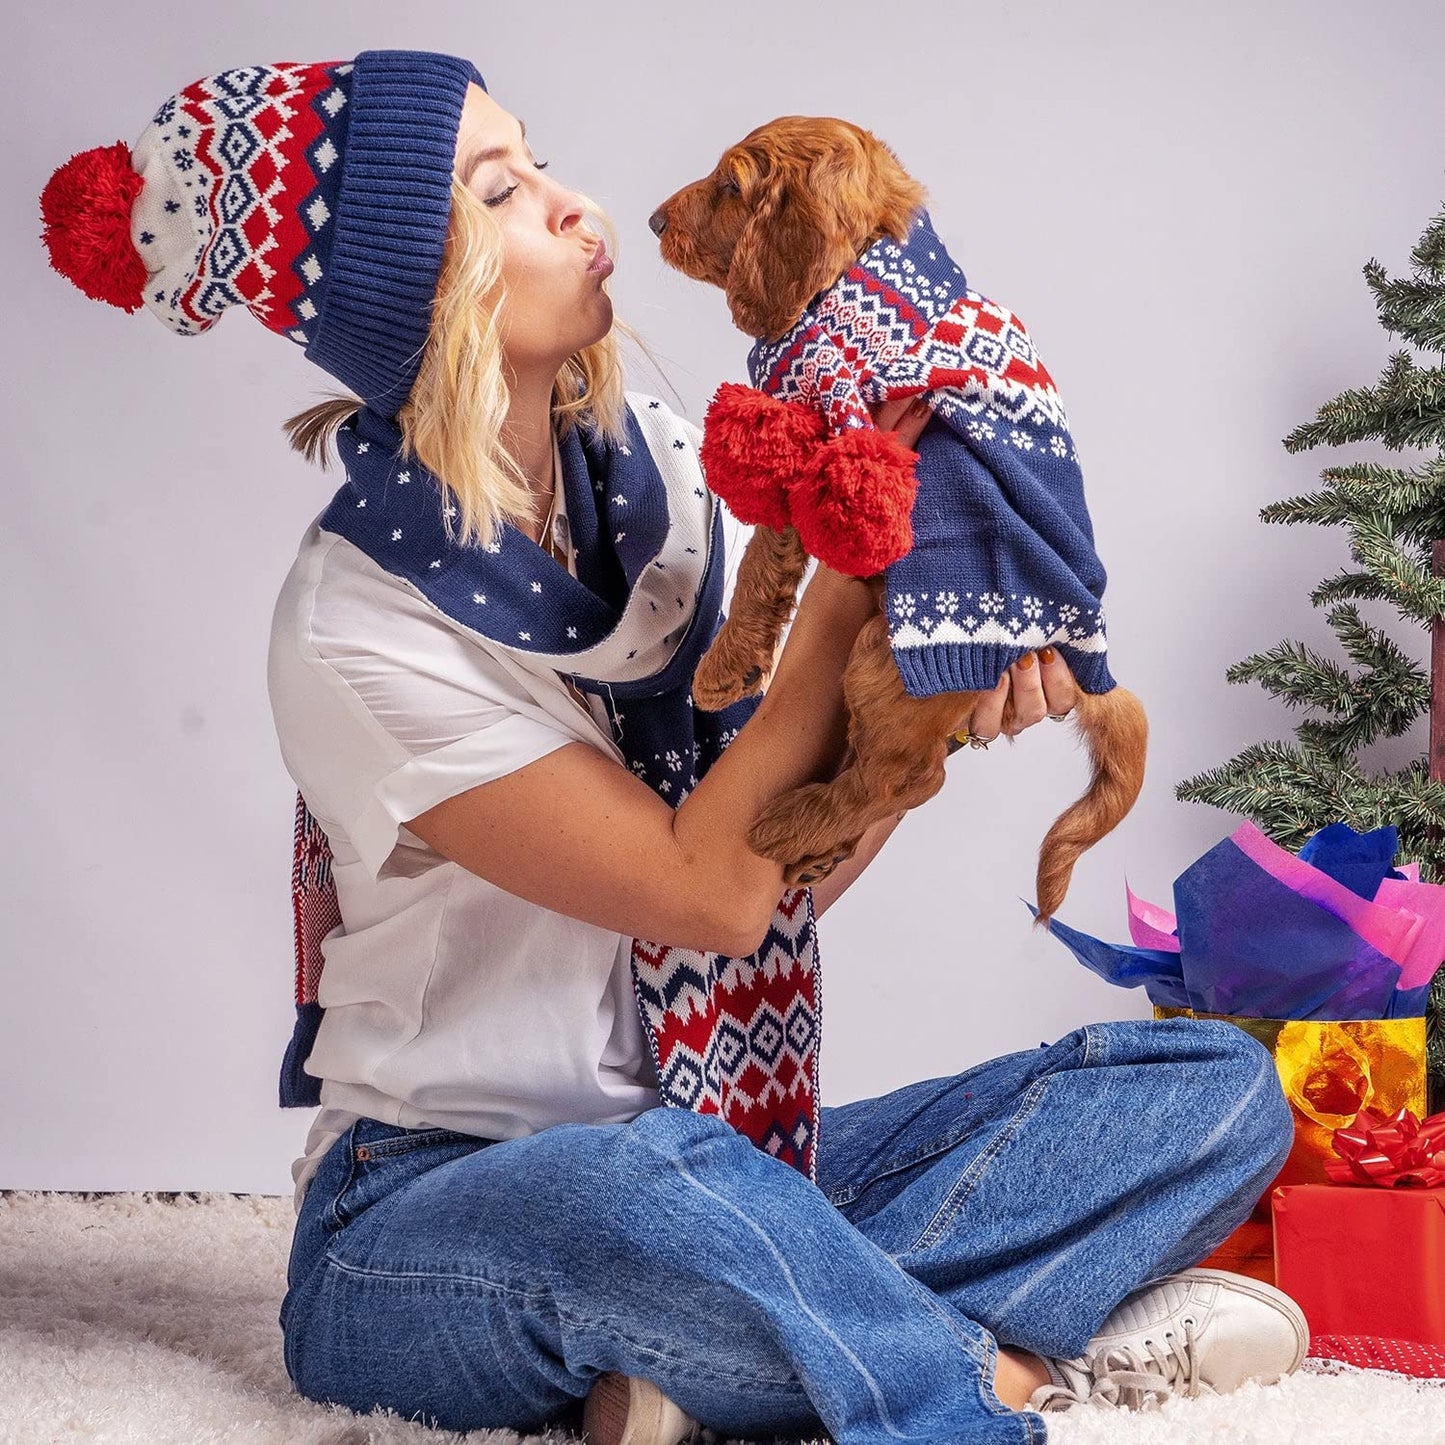 Blueberry Pet 2022/2023 New Christmas Family Scarf for Dog, Holiday Festive Fair Isle Dog Scarf in Navy Blue, Small/Medium